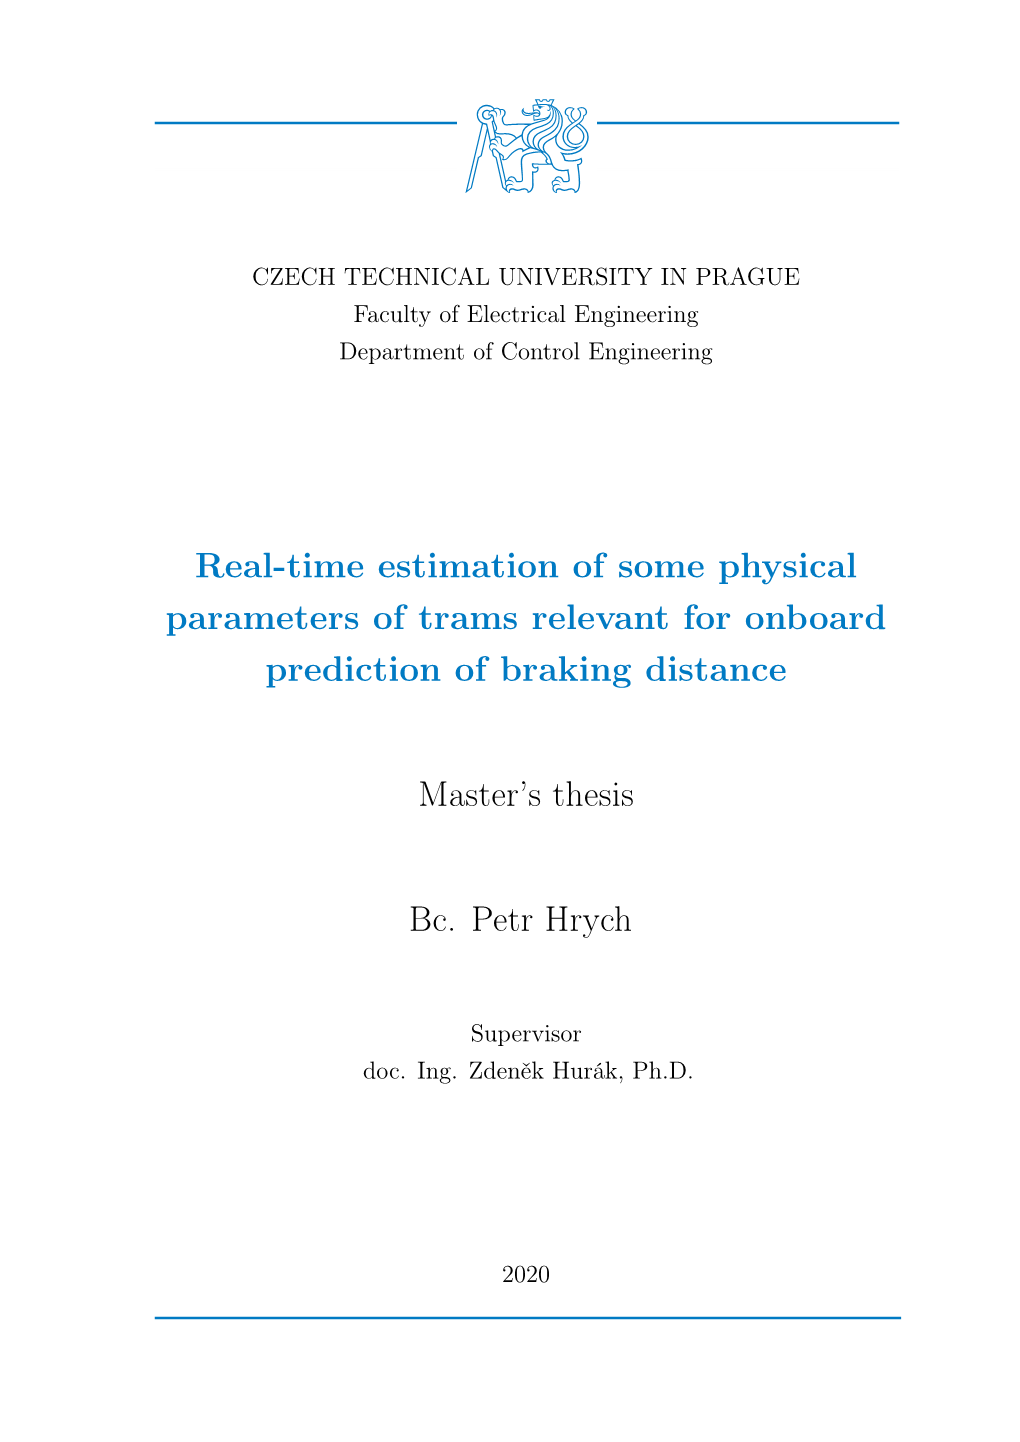 Real-Time Estimation of Some Physical Parameters of Trams Relevant for Onboard Prediction of Braking Distance